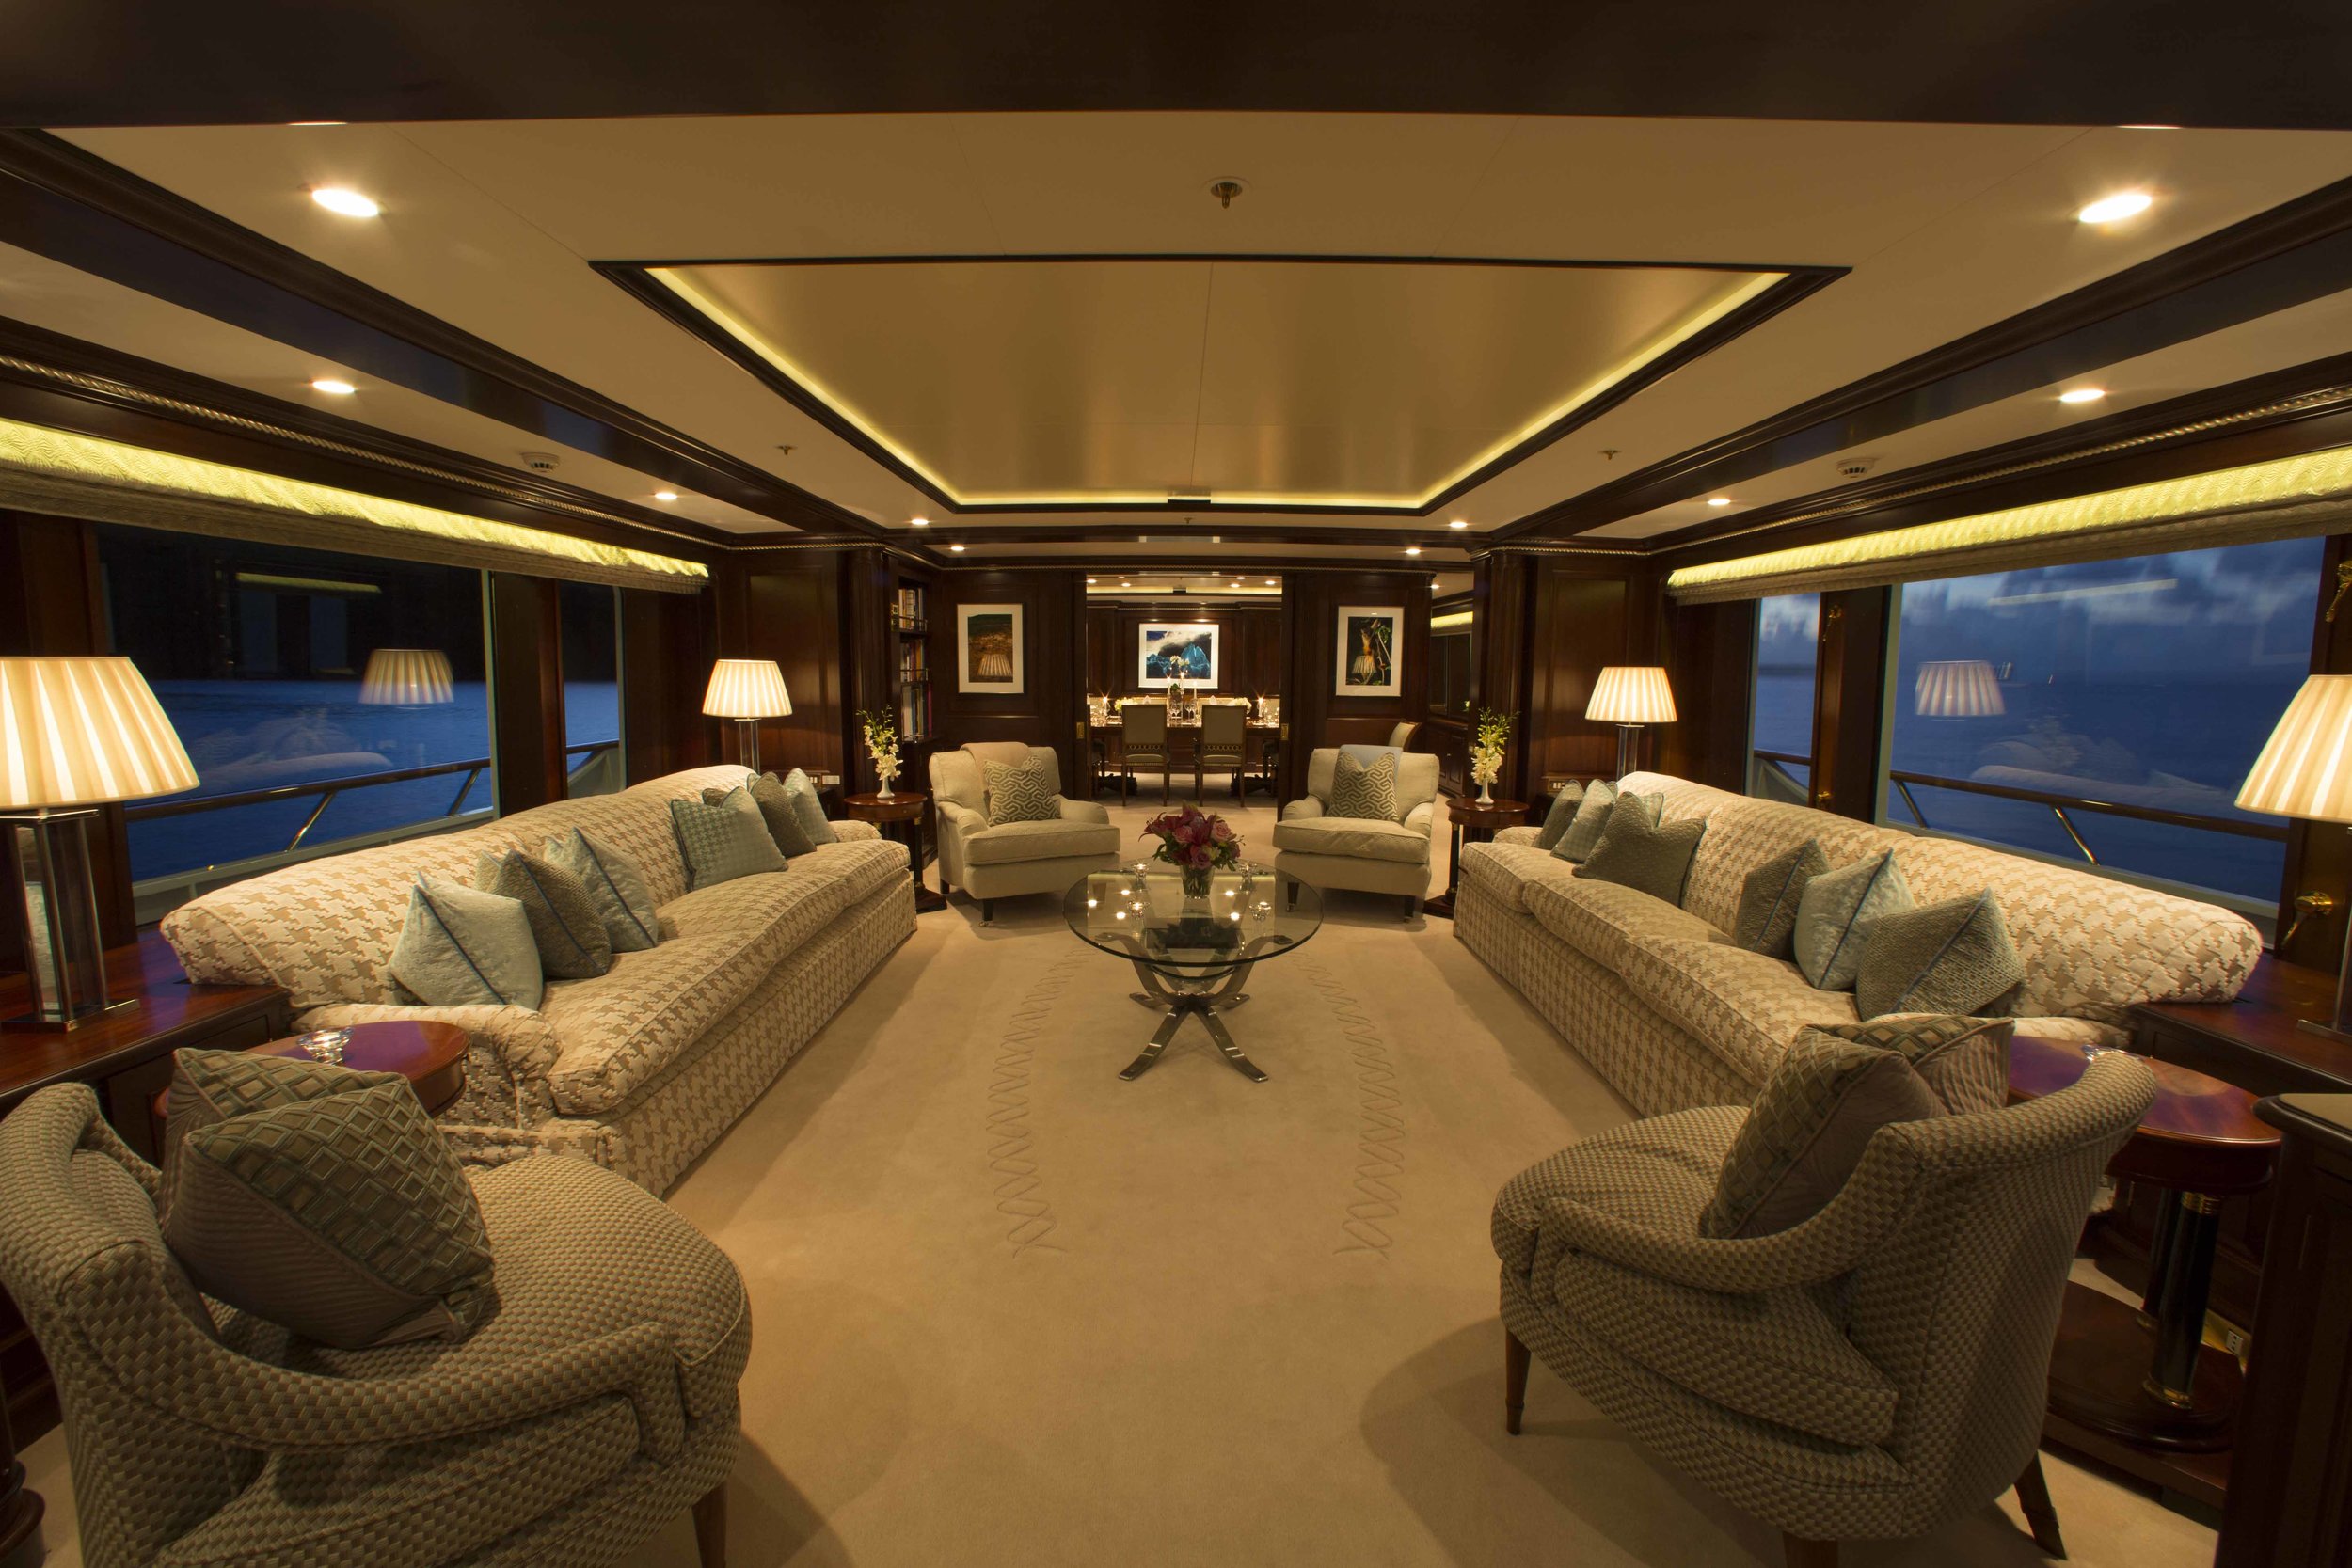  Interiors and details onboard Teleost, 161' Feadship in St. Thomas, USVI. 